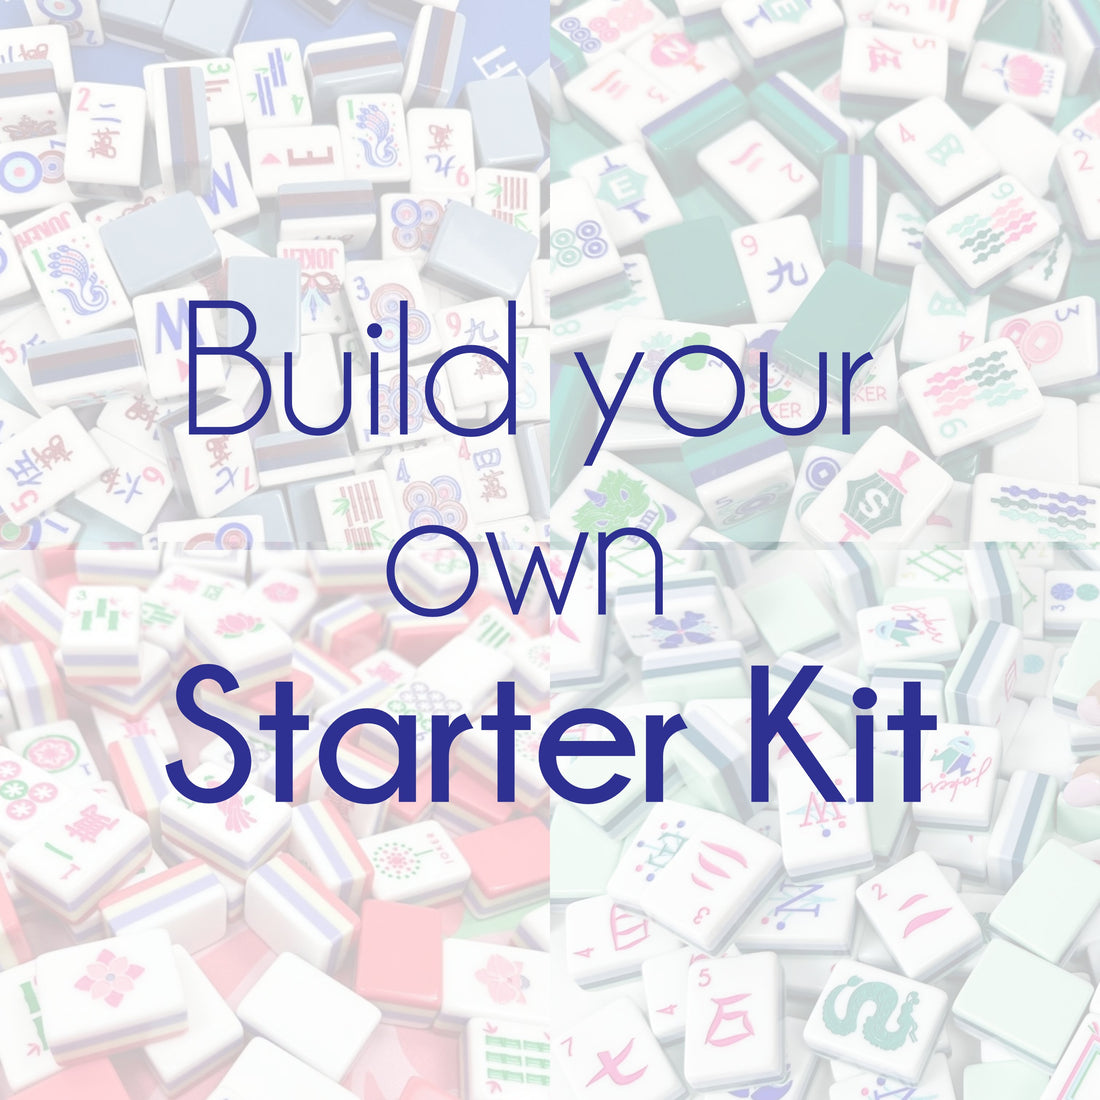 Build your own Starter Kit - Oh My Mahjong